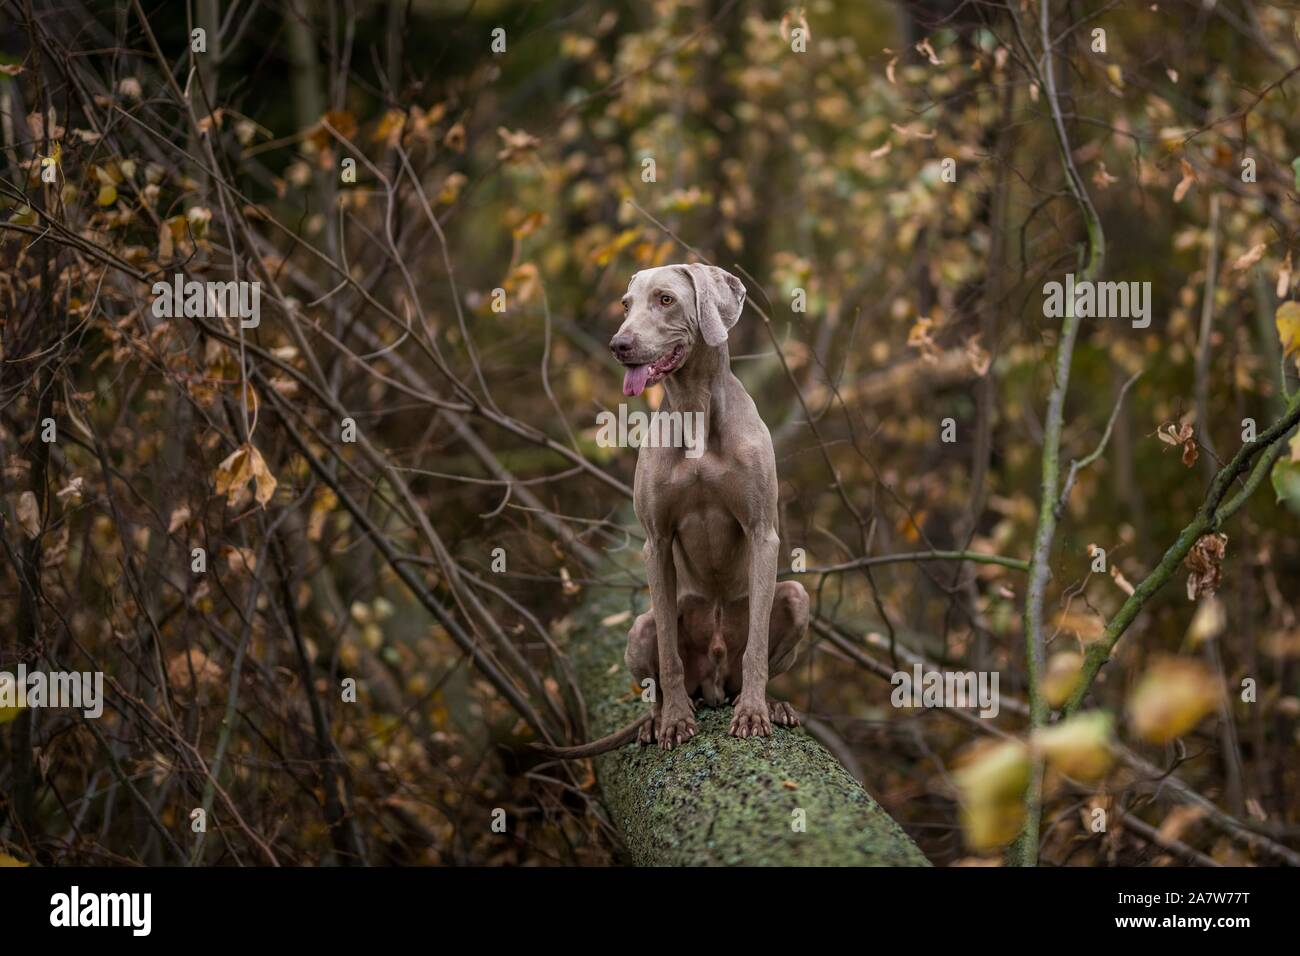 Weimaraner posing on a meadow in autumn leaves Stock Photo